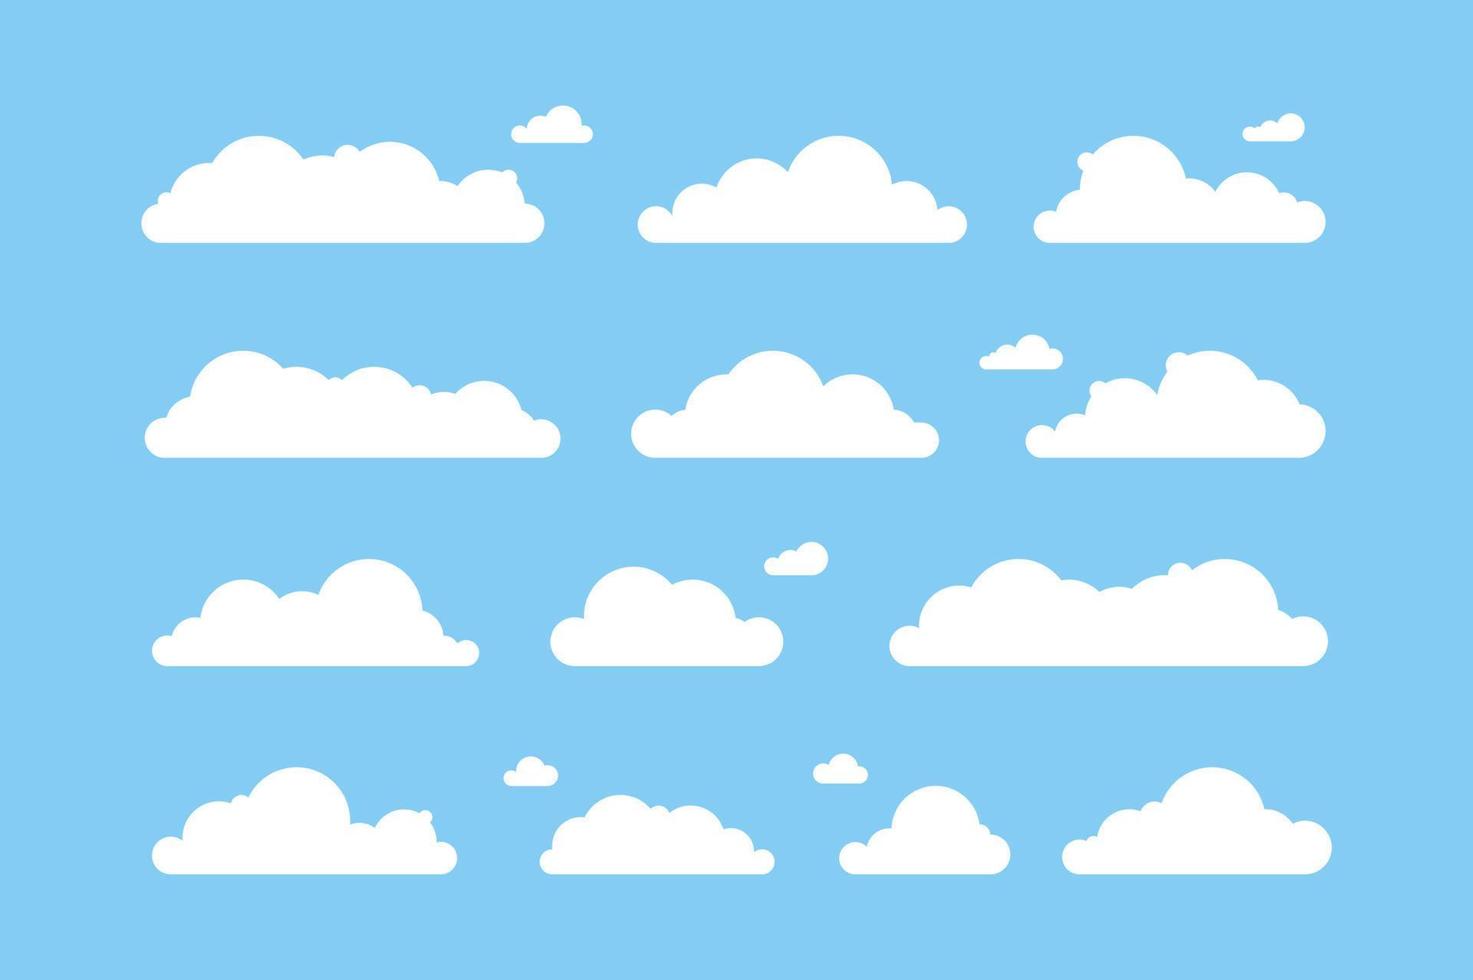 Cloud illustration. set of clouds flat illustration. cartoon style vector. abstract bubble sky icon vector